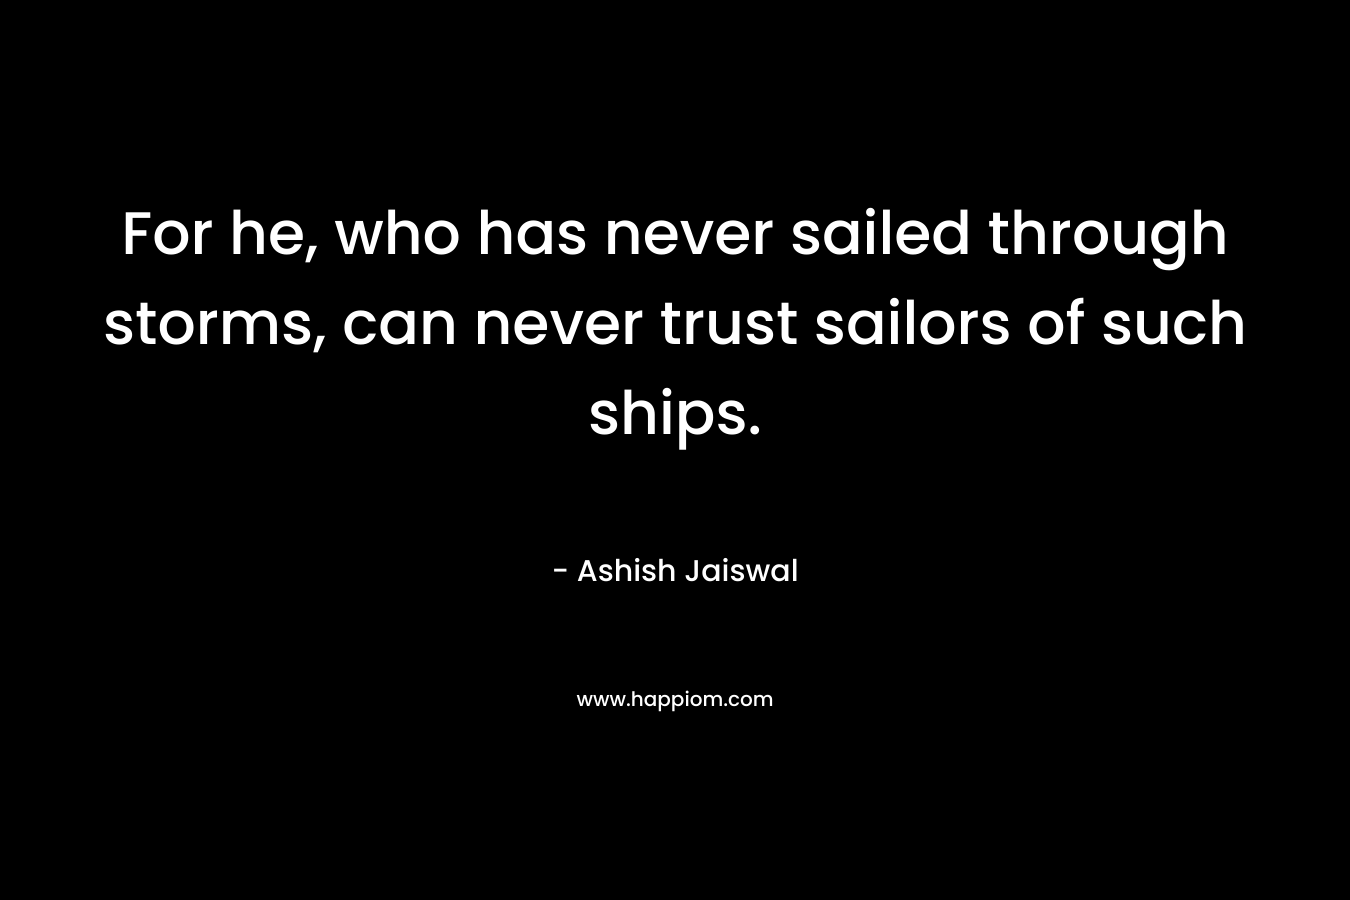 For he, who has never sailed through storms, can never trust sailors of such ships. – Ashish Jaiswal